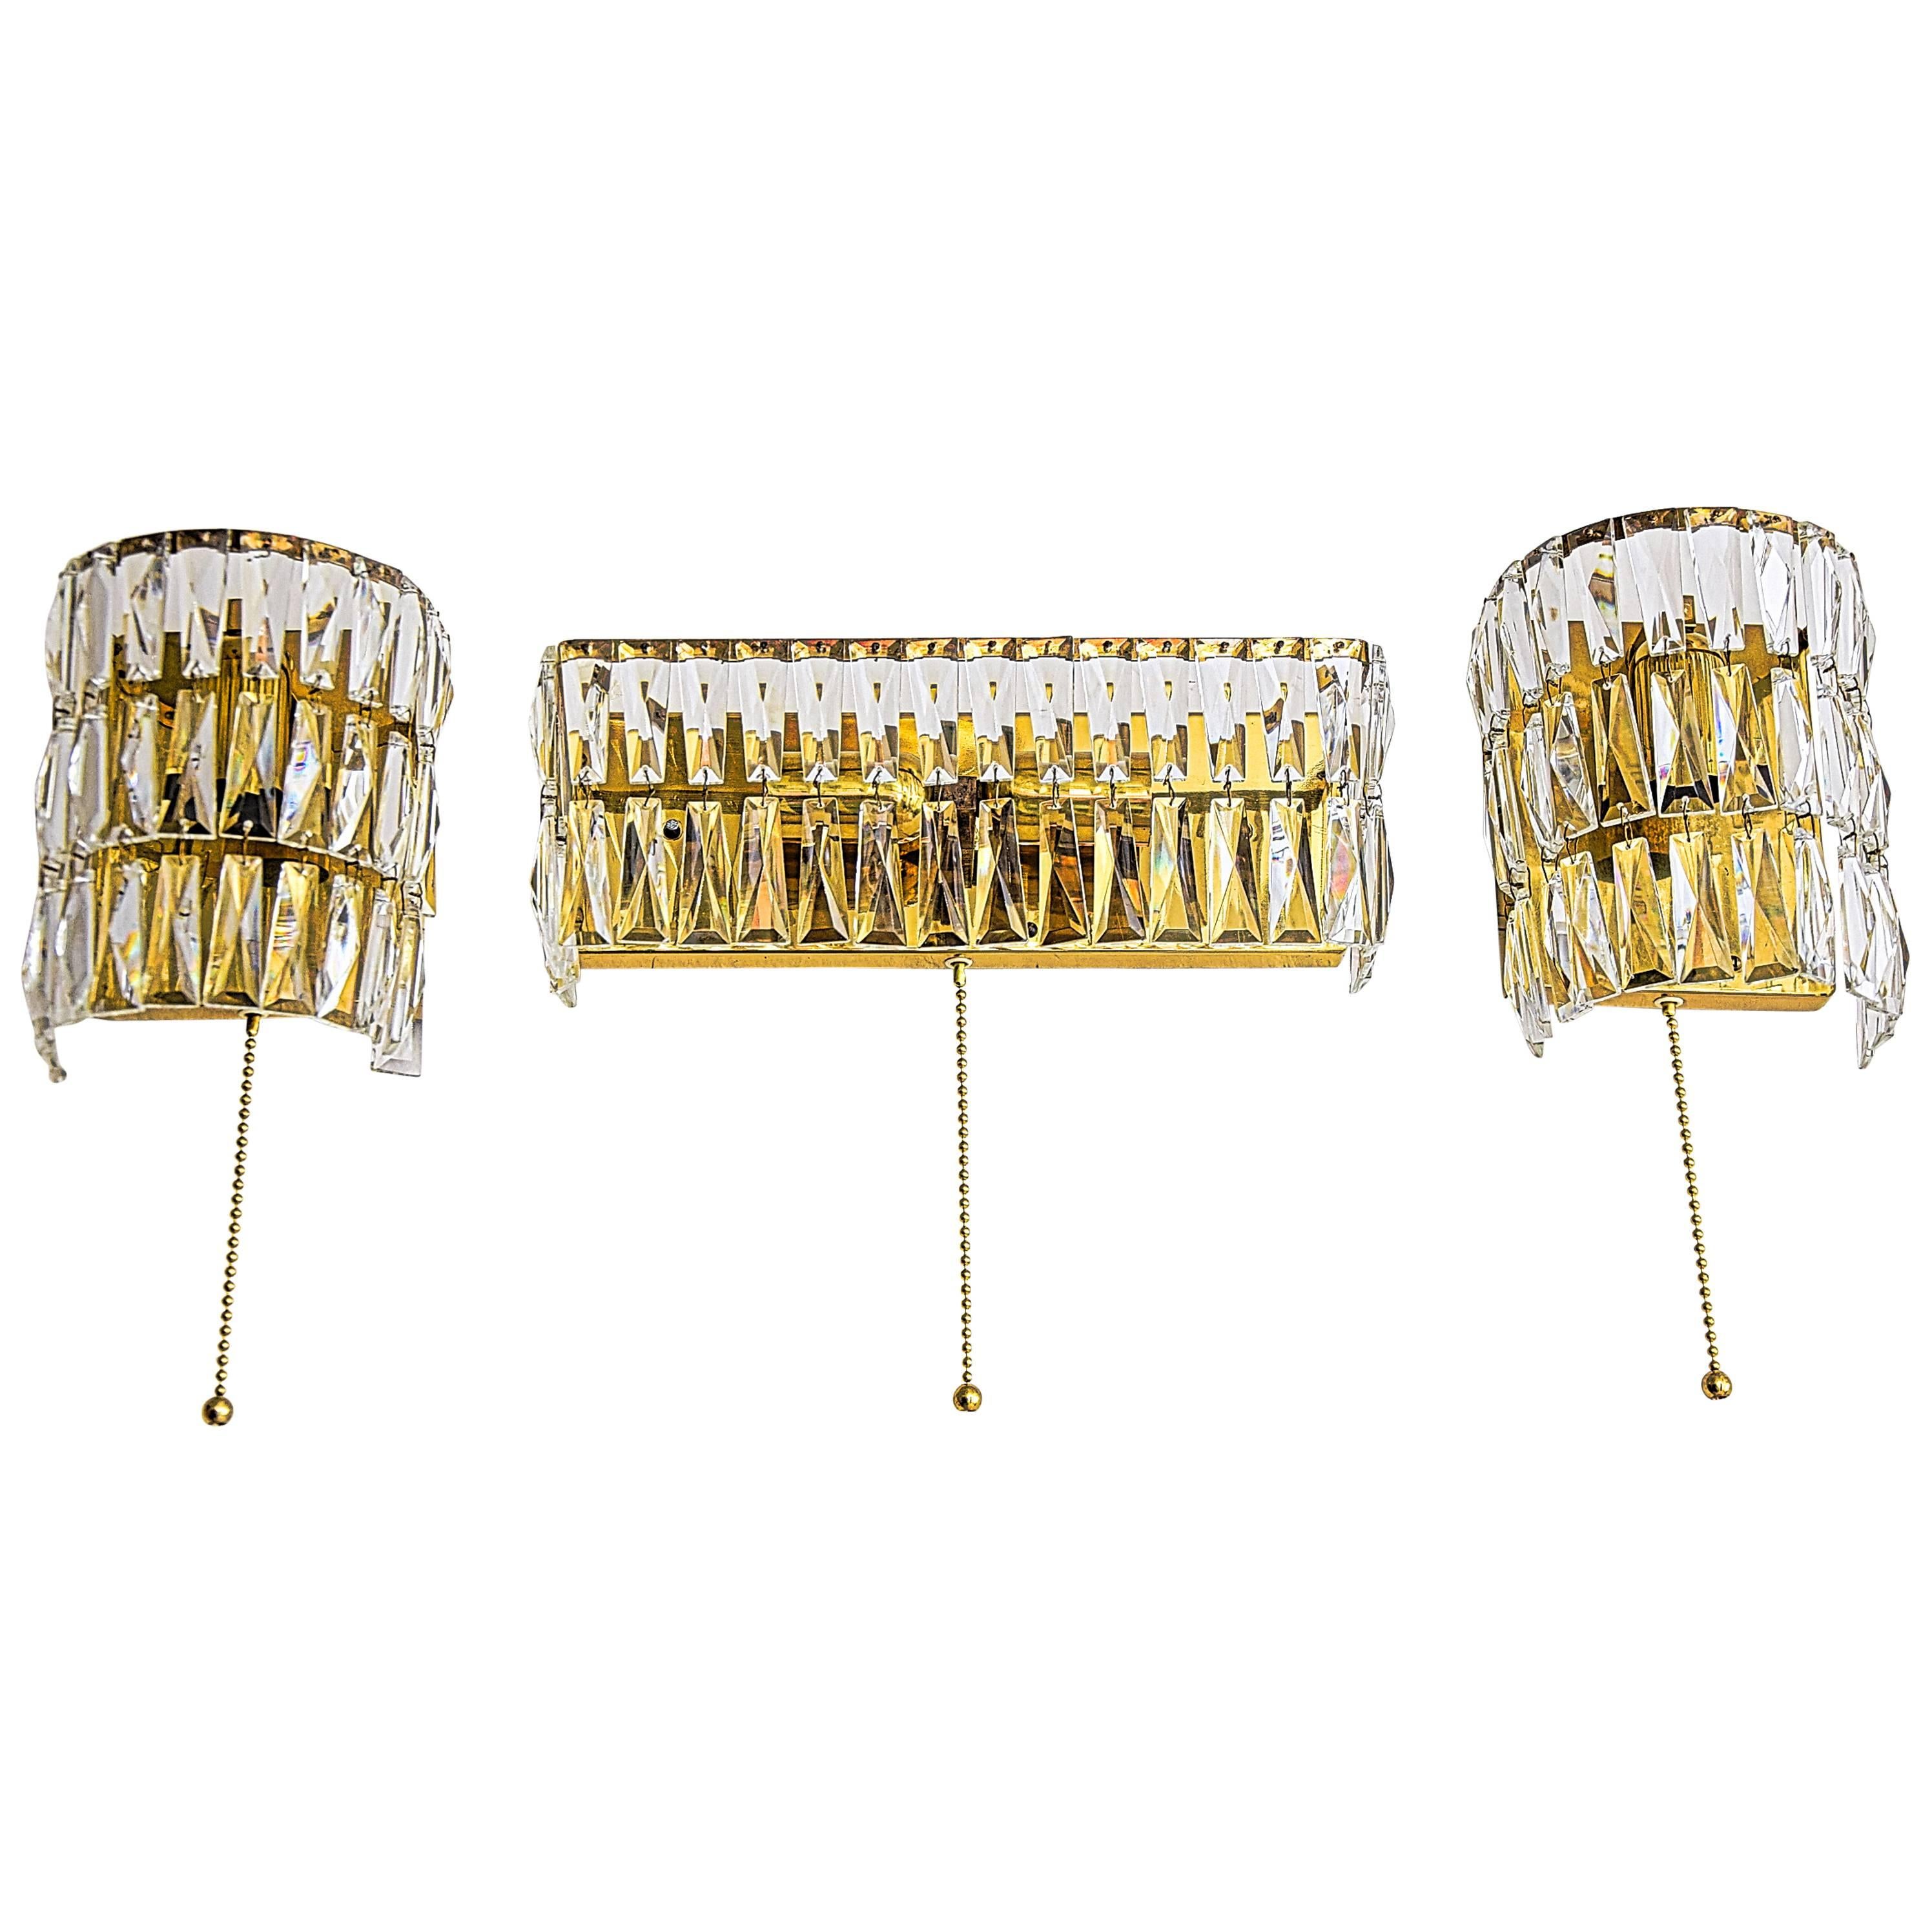 Three Wall Lamps with Cut Glass by Bakalowits